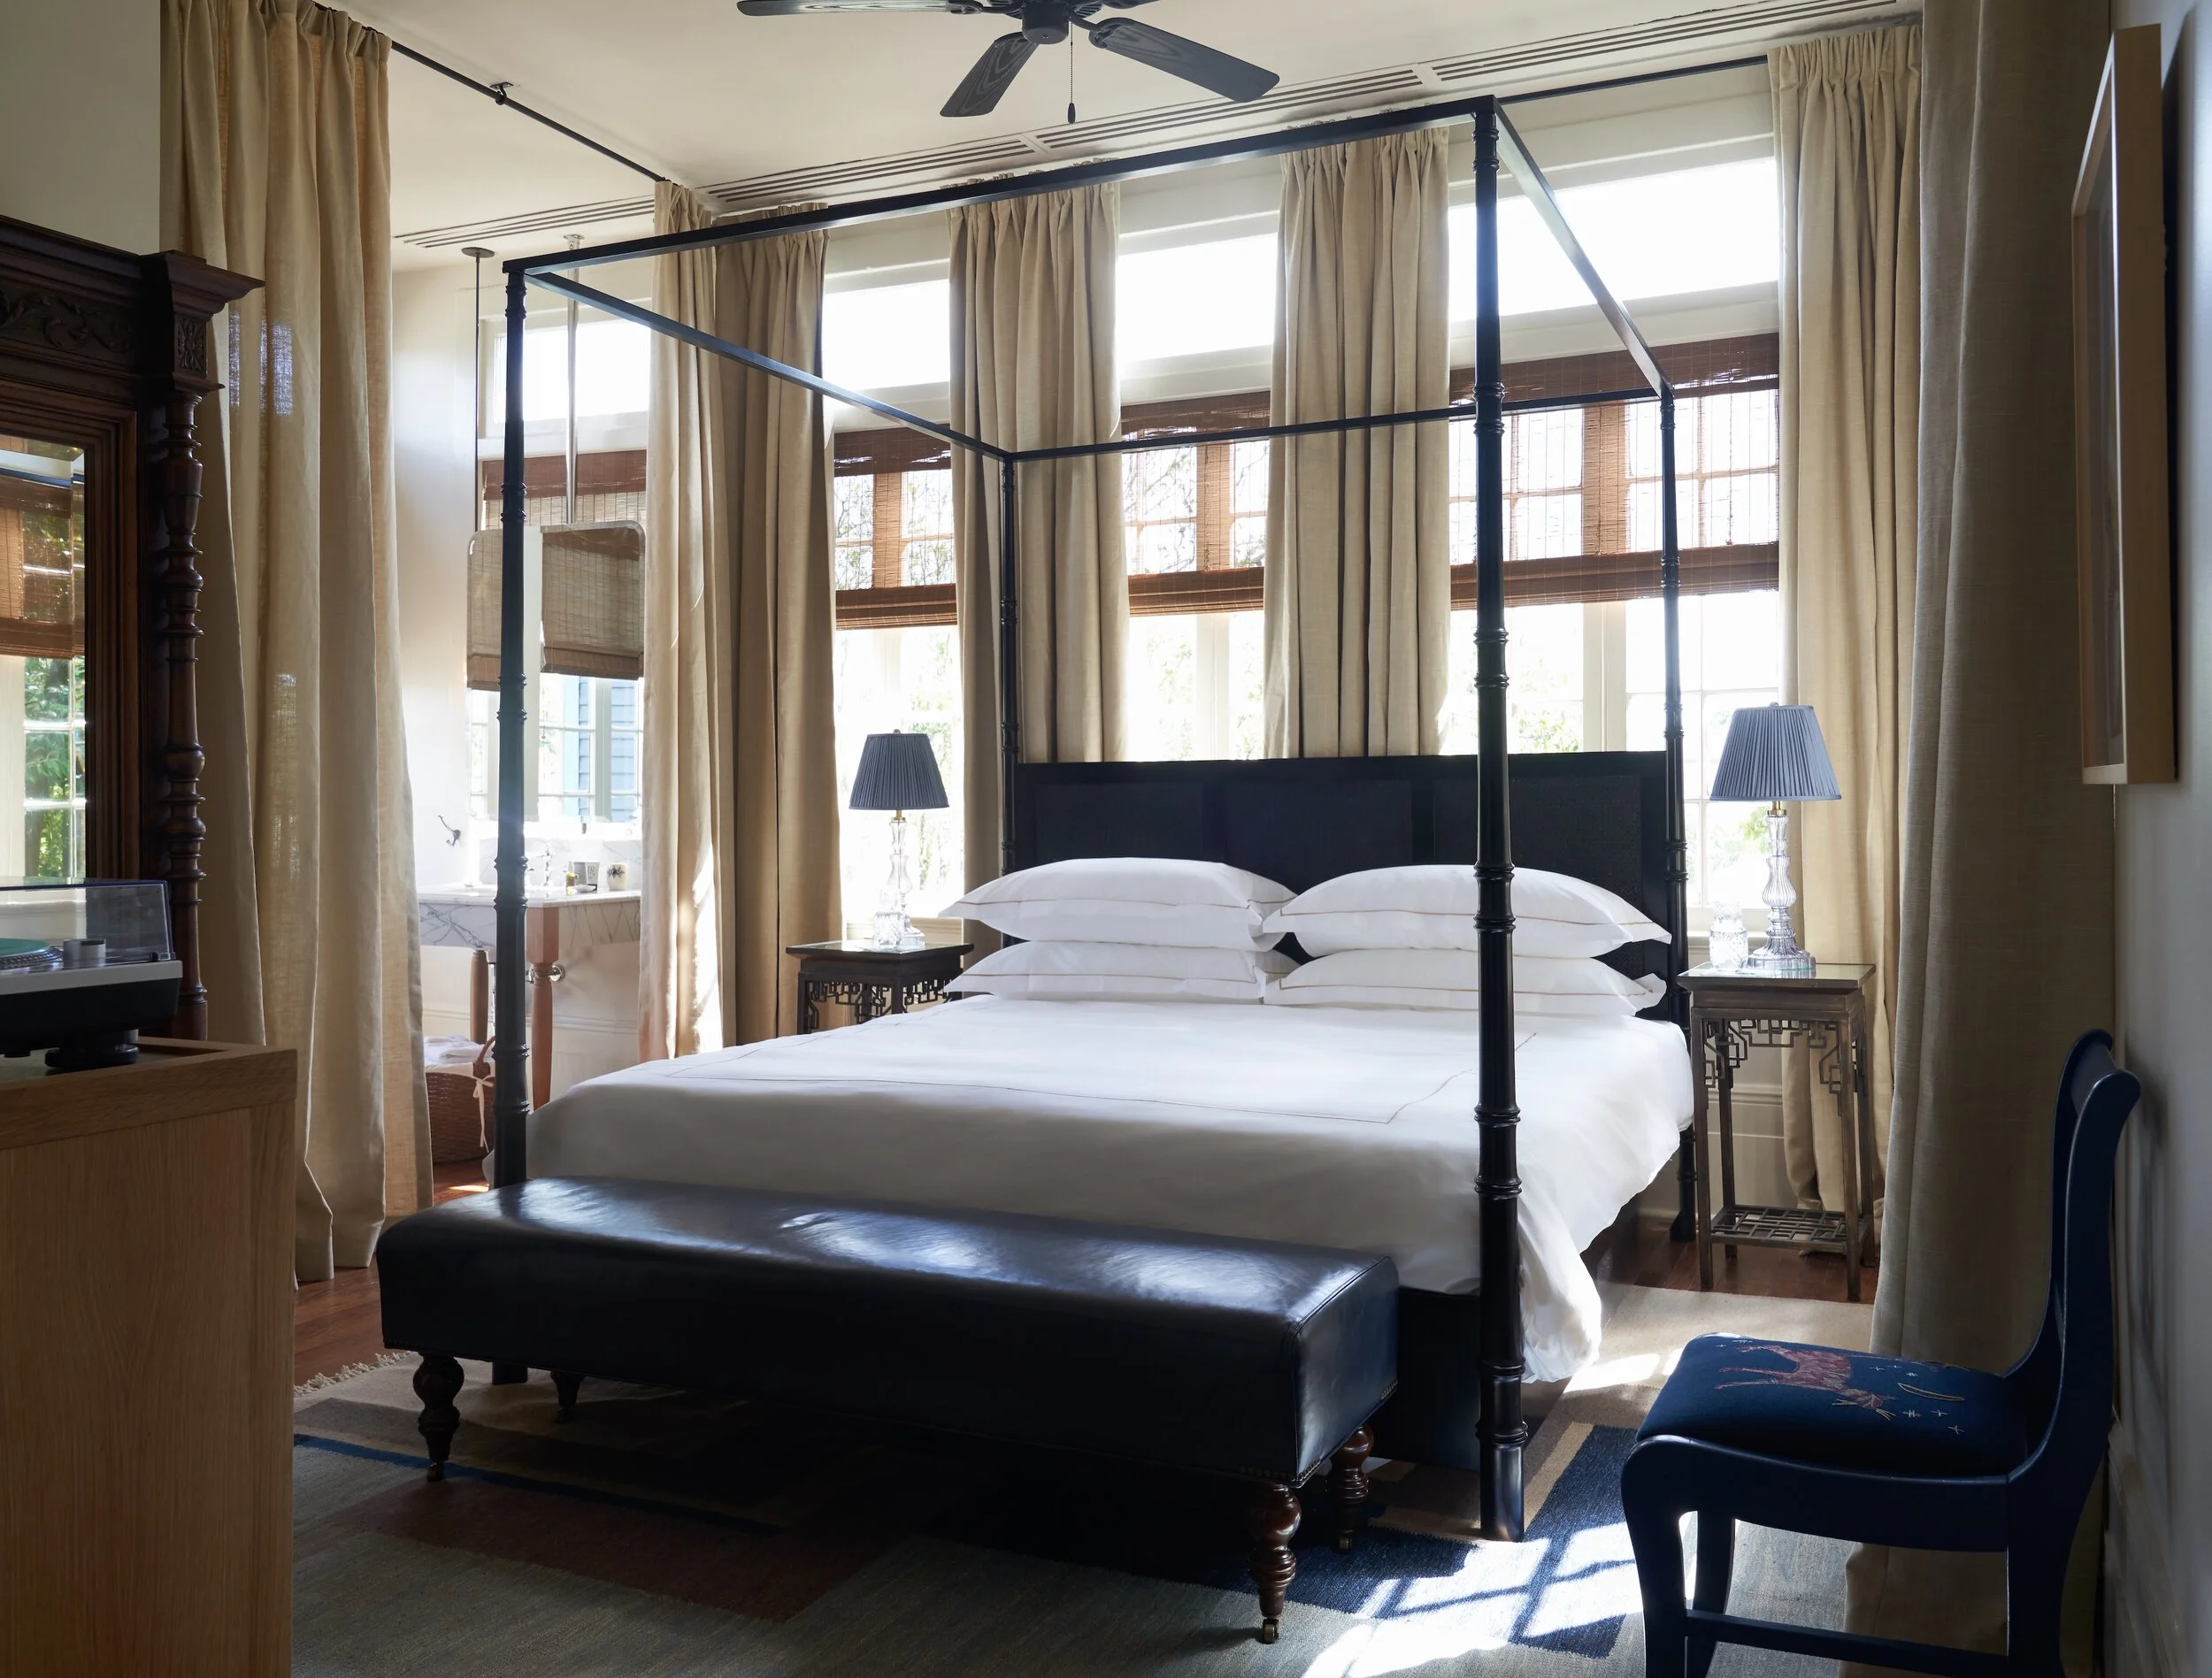 A memorable hotel in New Orleans:  The Chloe